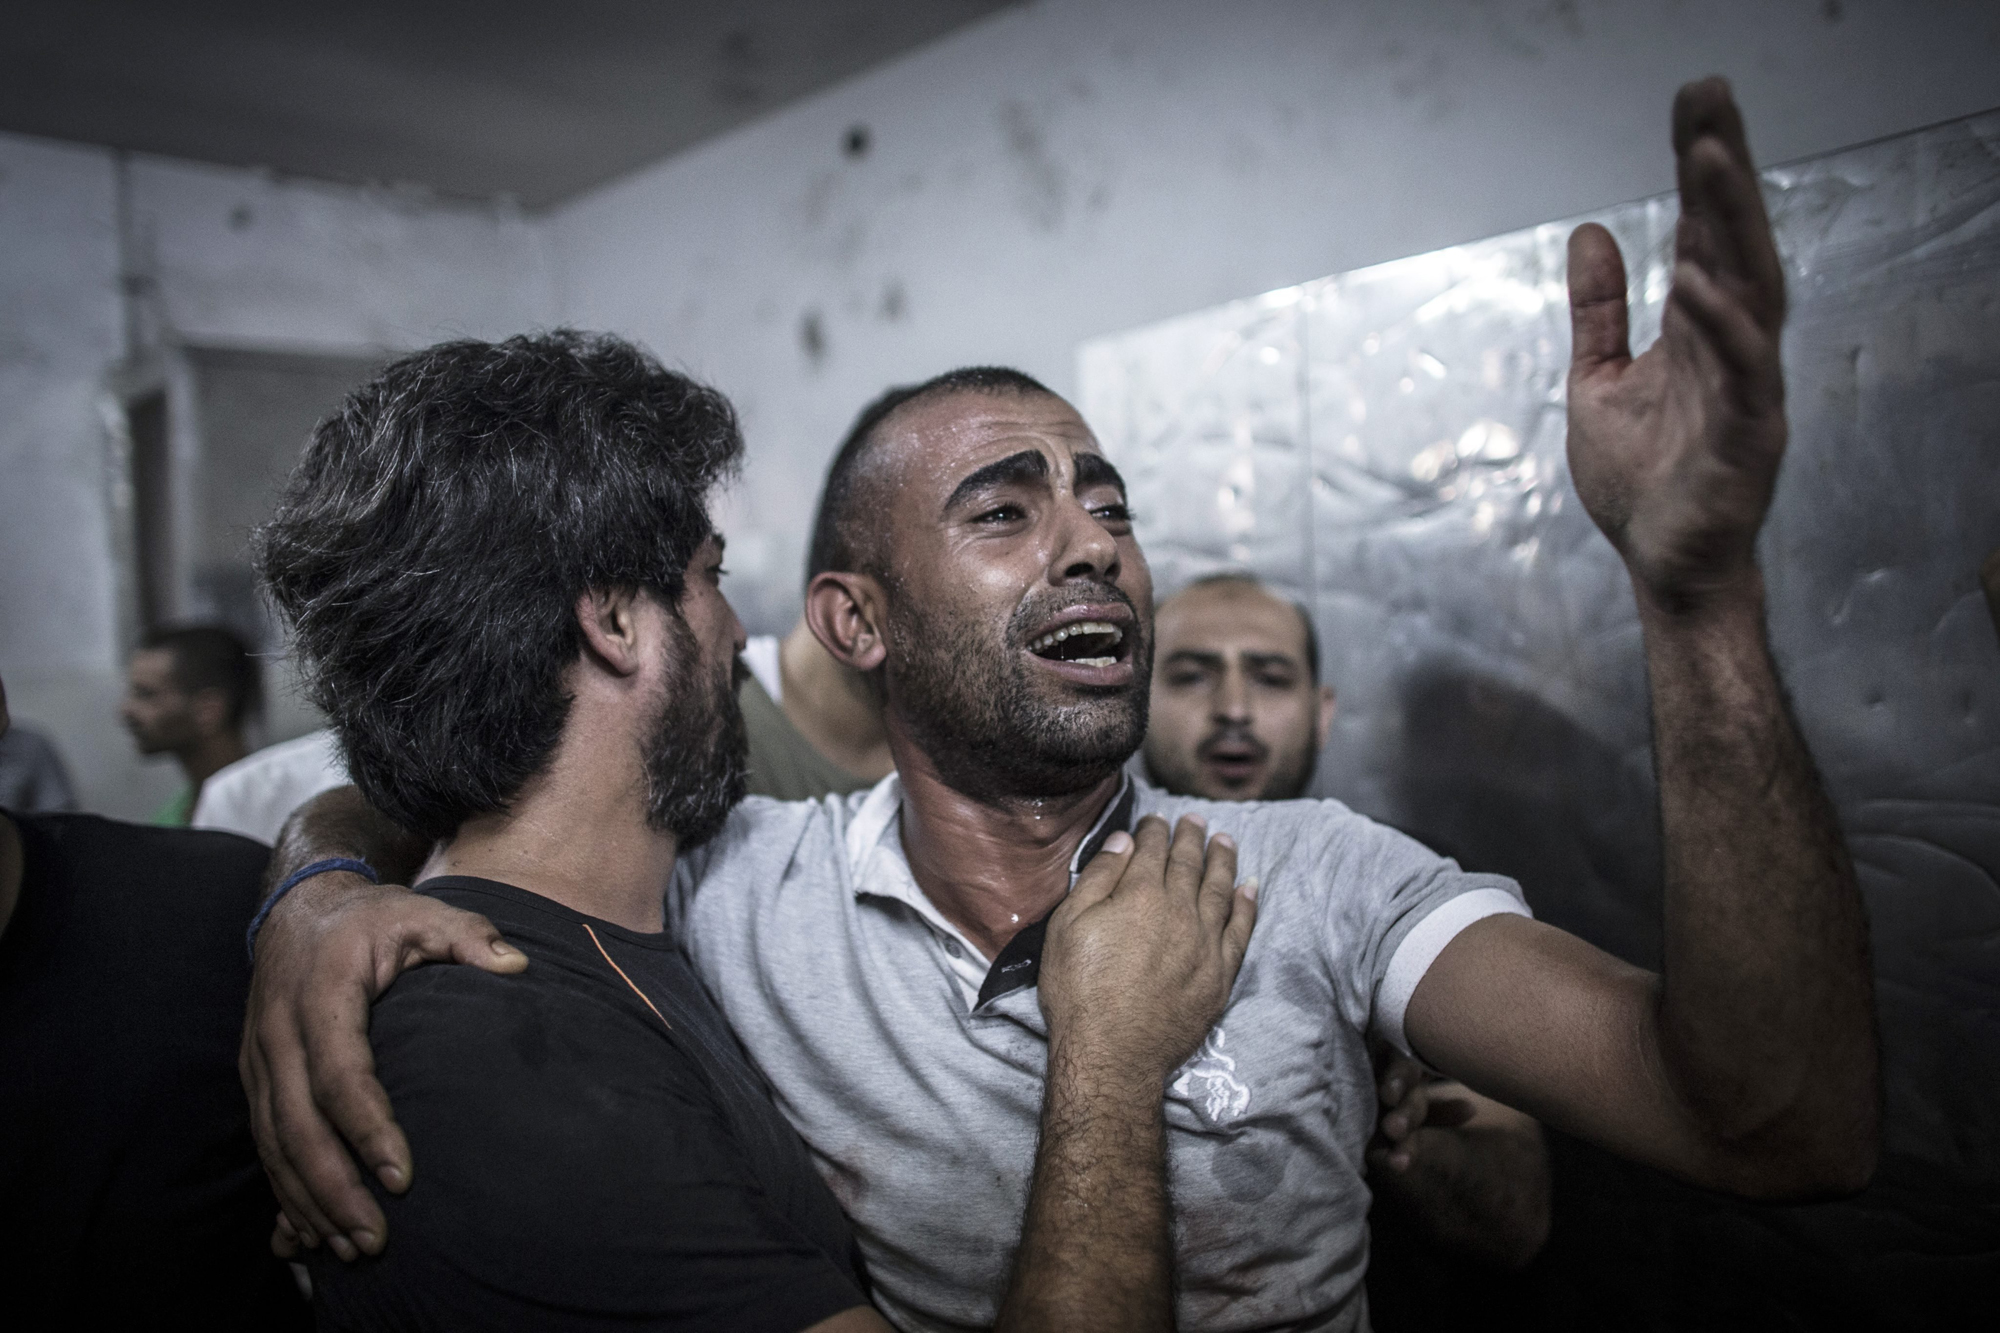 Palestinian men react after the bodies of several children arrived in the morgue of the Shifa hospital in Gaza City, July 28, 2014.